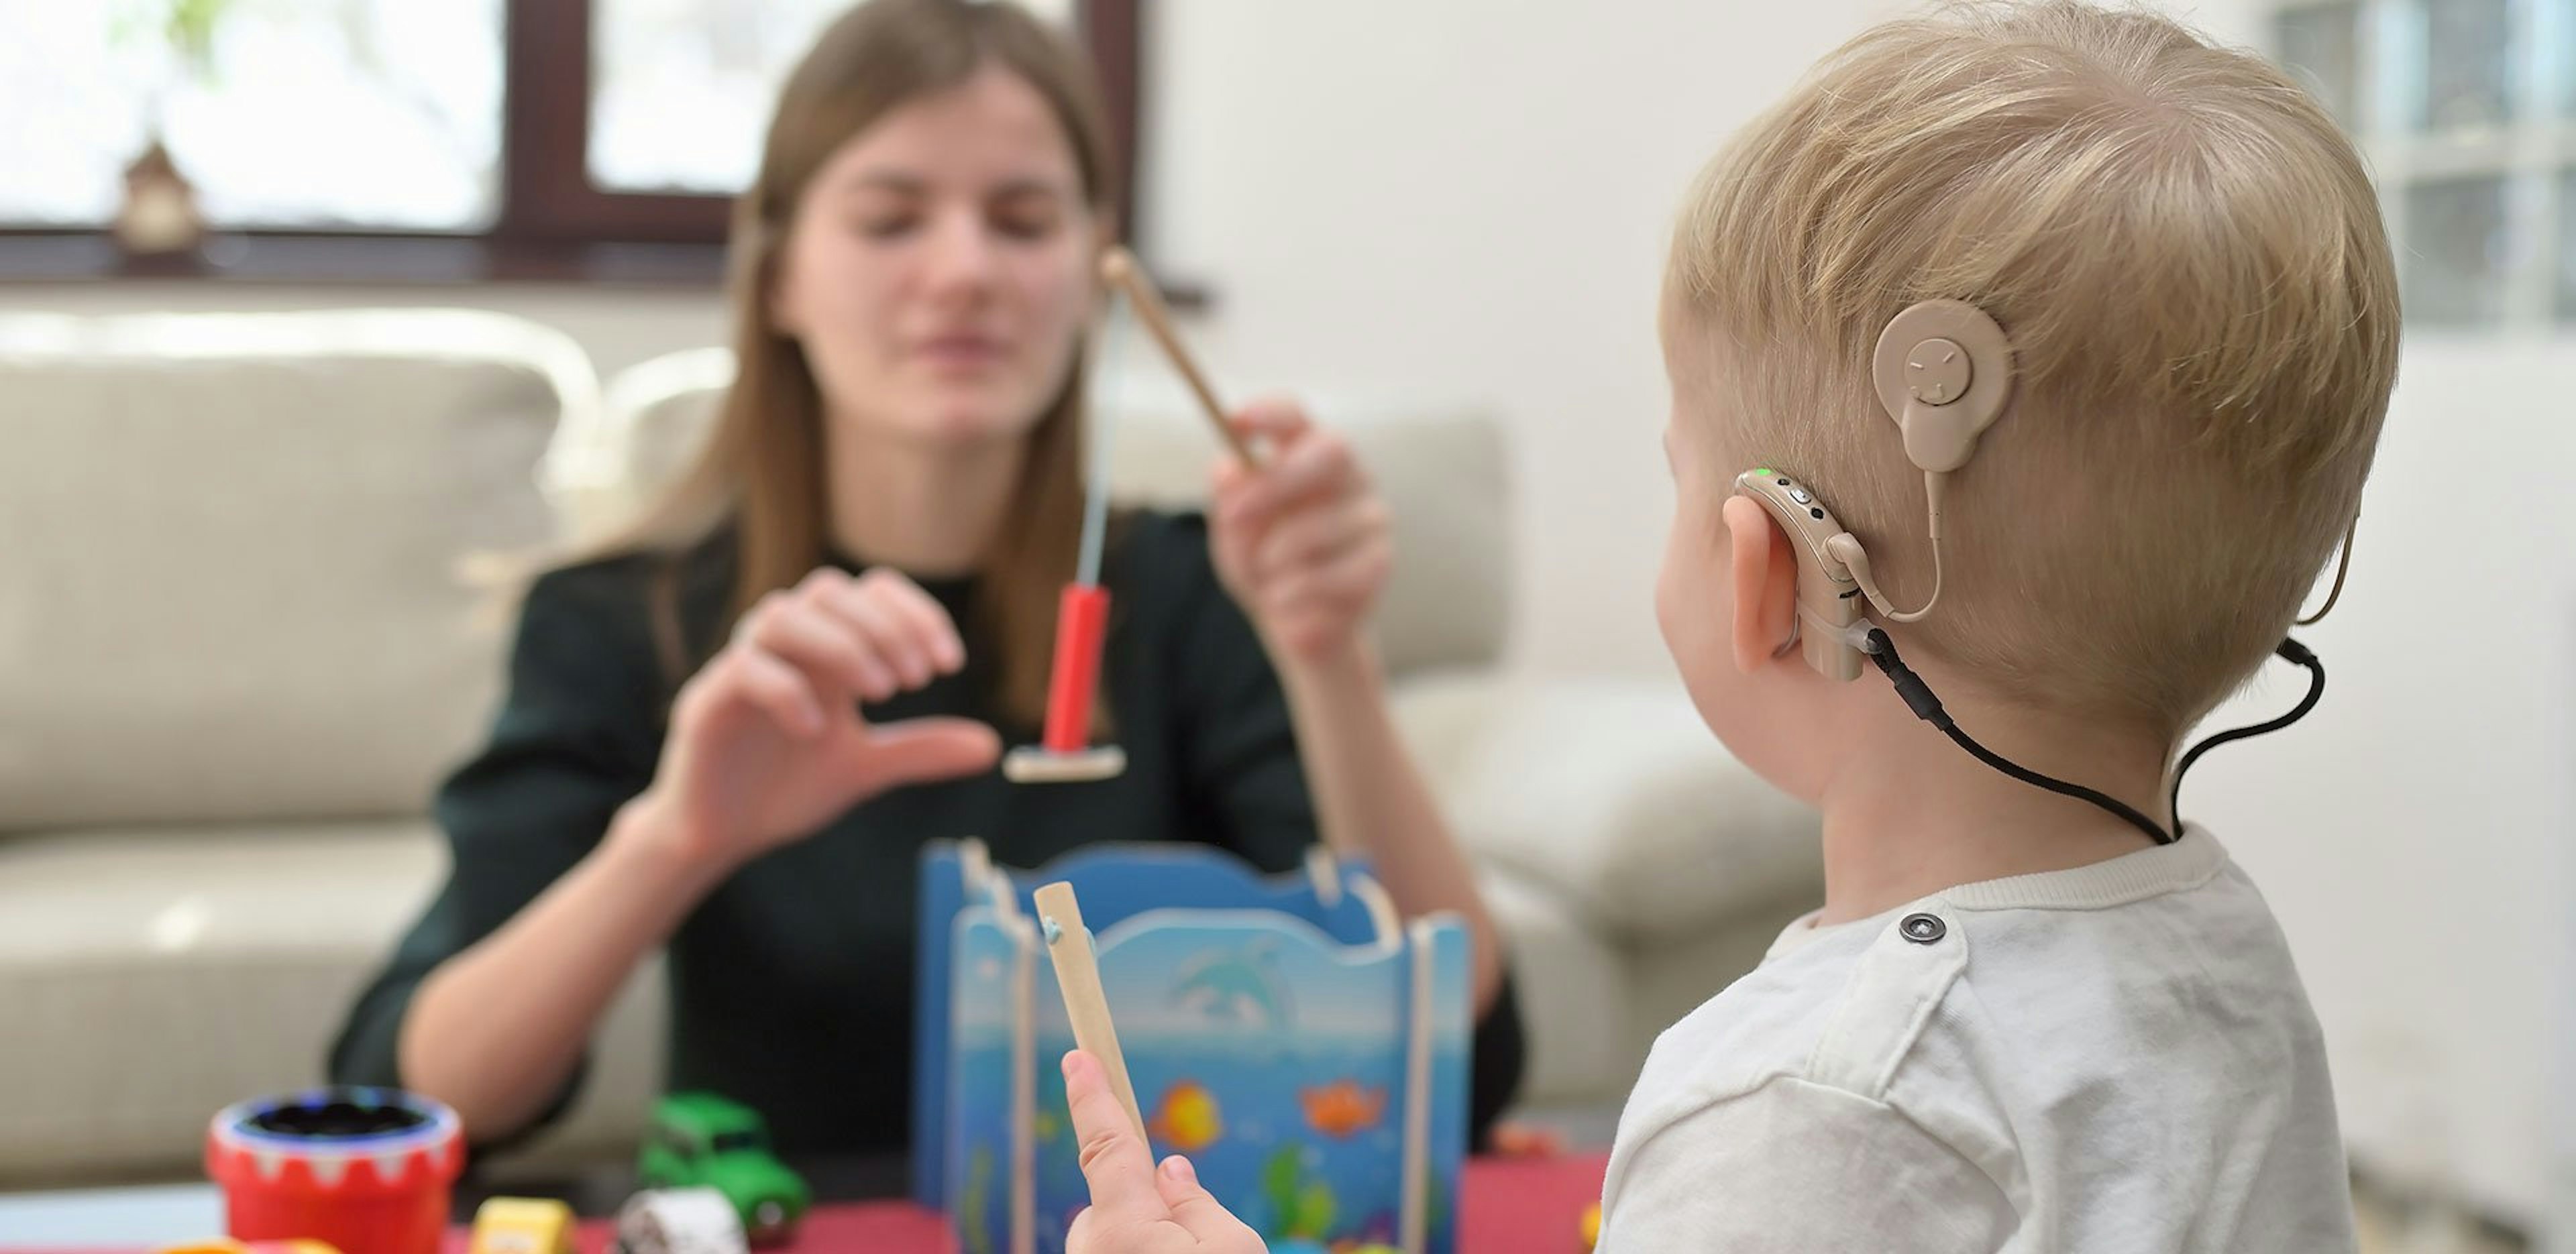 Child with cochlear implant playing